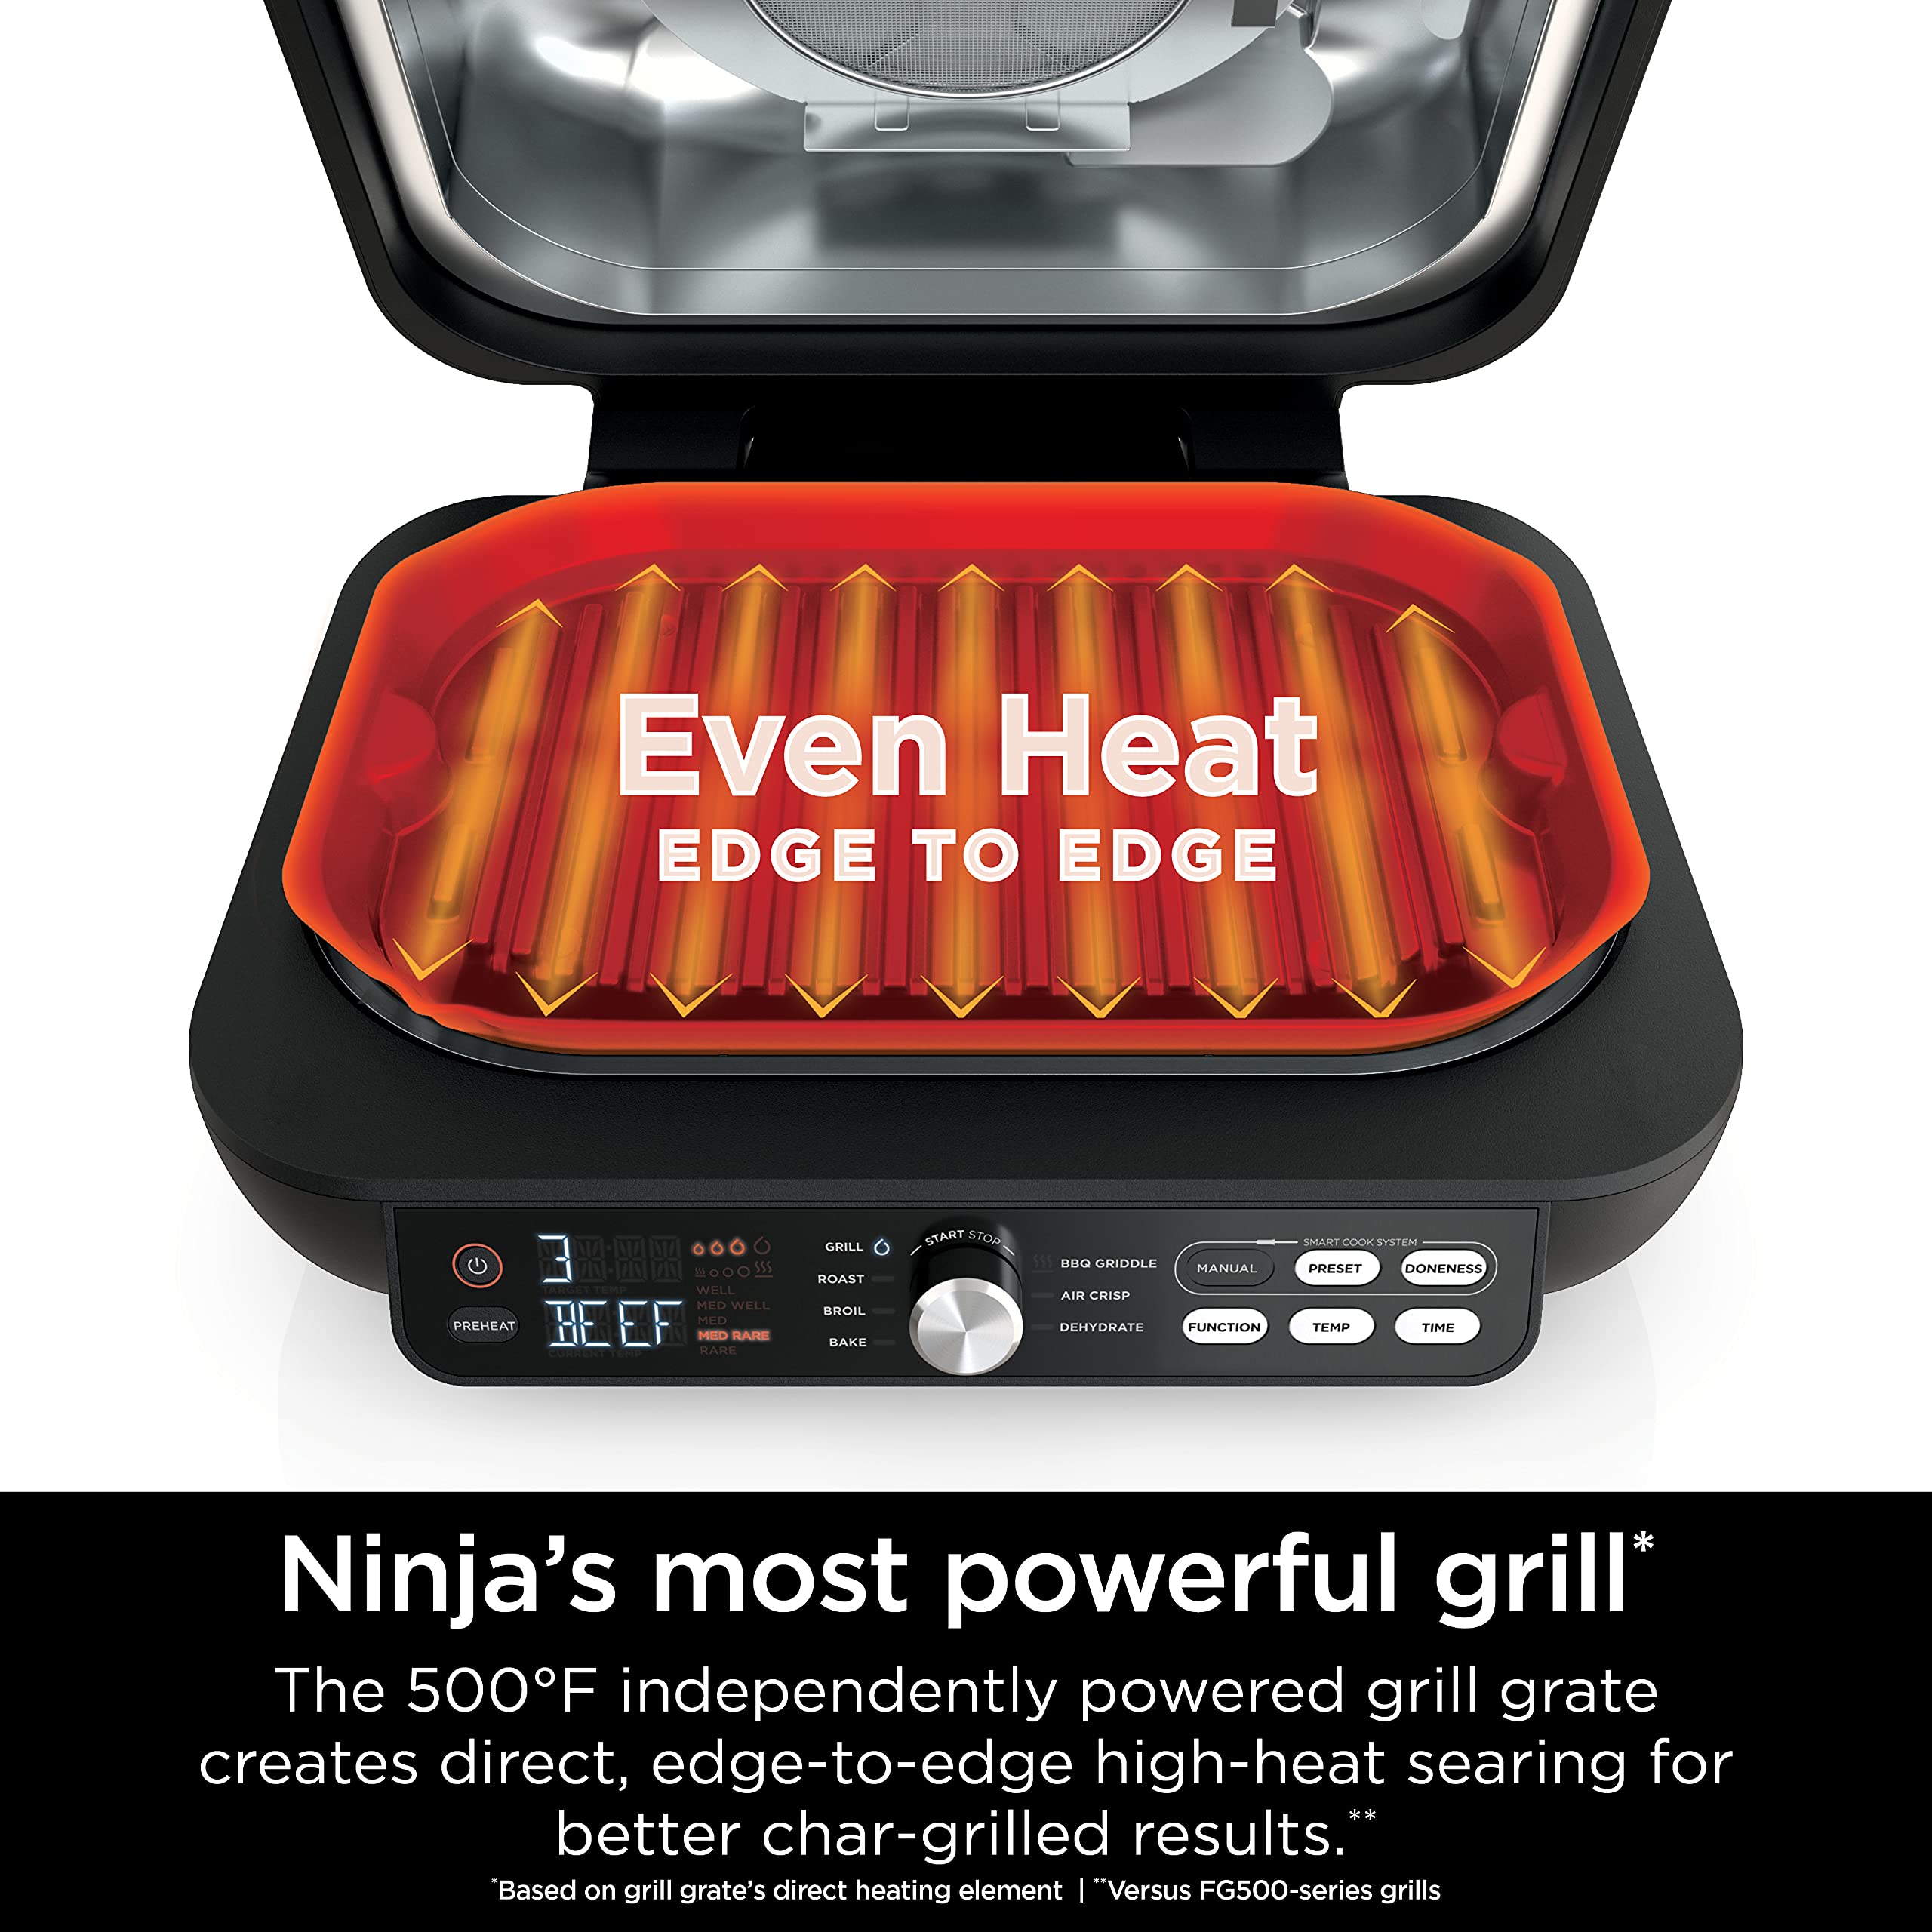 Ninja IG651 Foodi Smart XL Pro 7-in-1 Indoor Grill/Griddle Combo, use Opened or Closed, Air Fry, Dehydrate & More, Pro Power Grate, Flat Top, Crisper, Smart Thermometer, Black